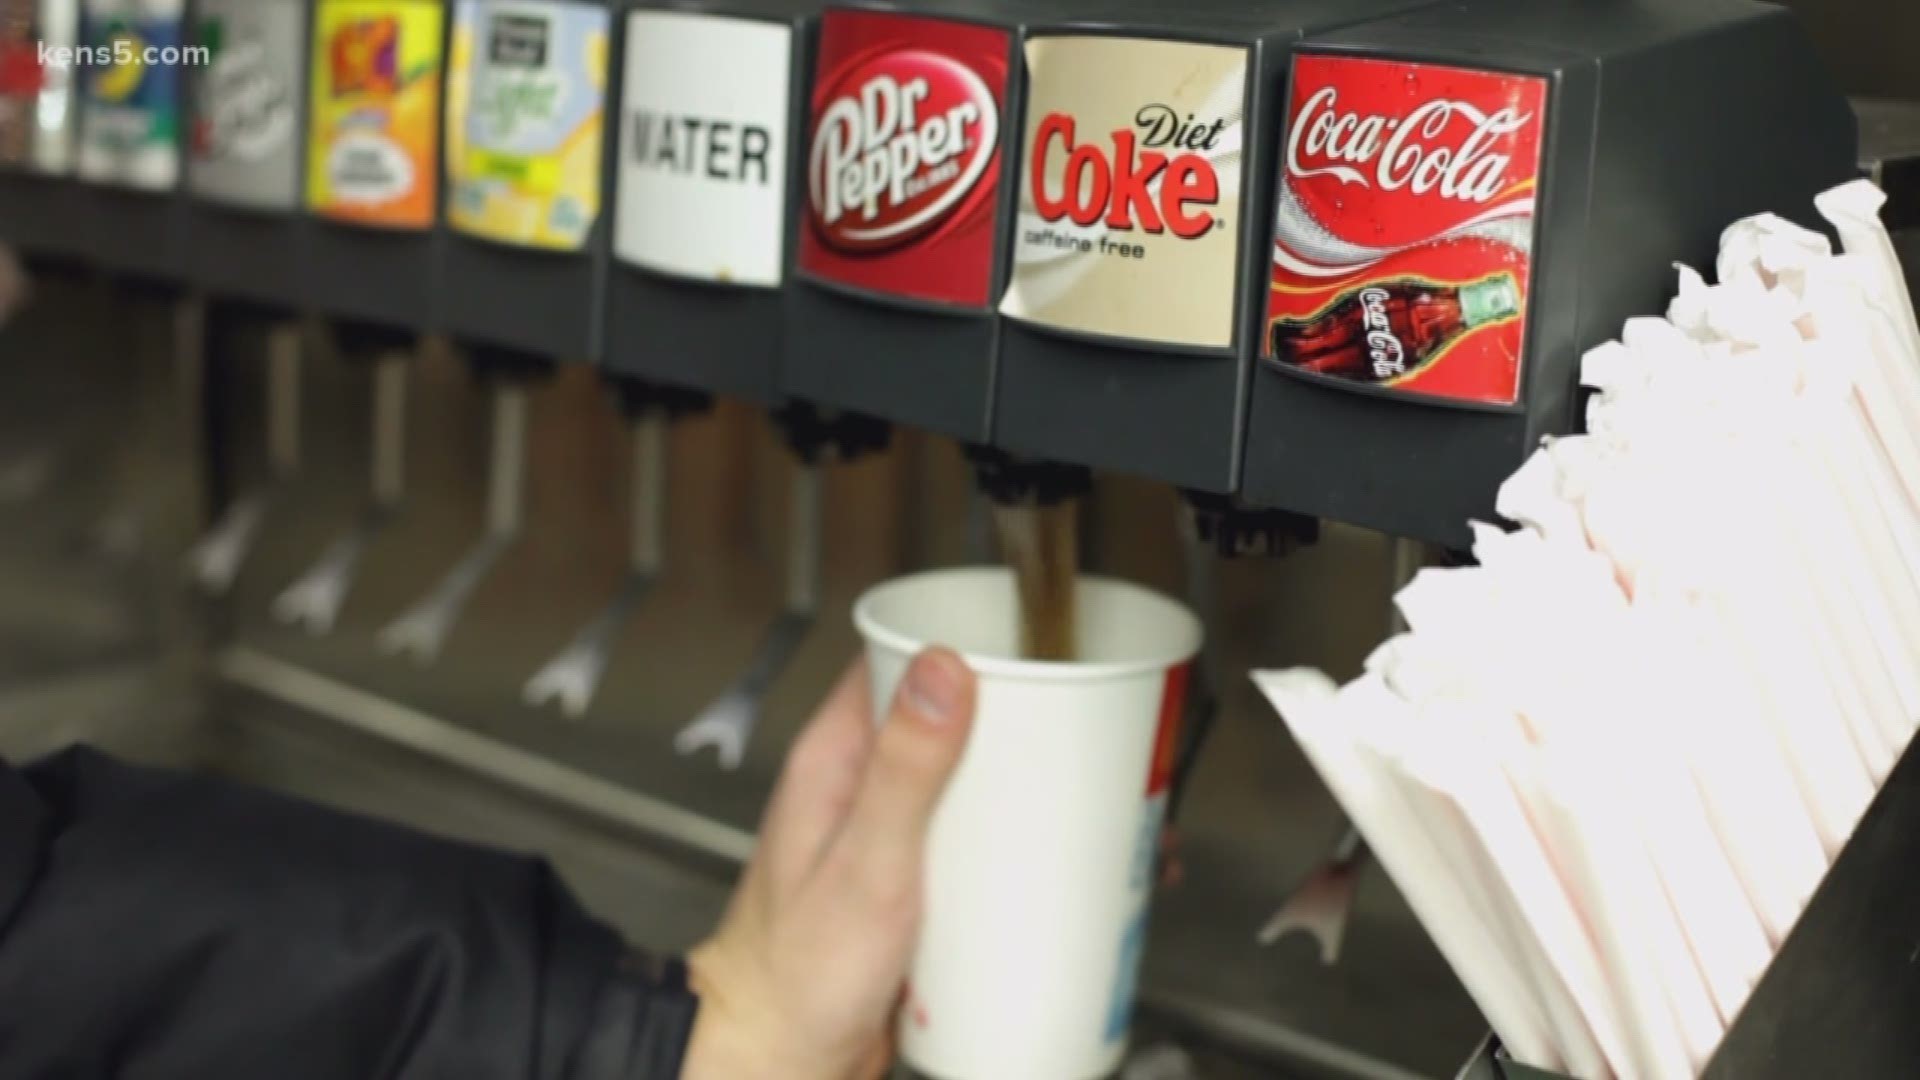 Diet soda is a way for people to get their soda fix without the sugar. But just how healthy is it for you?